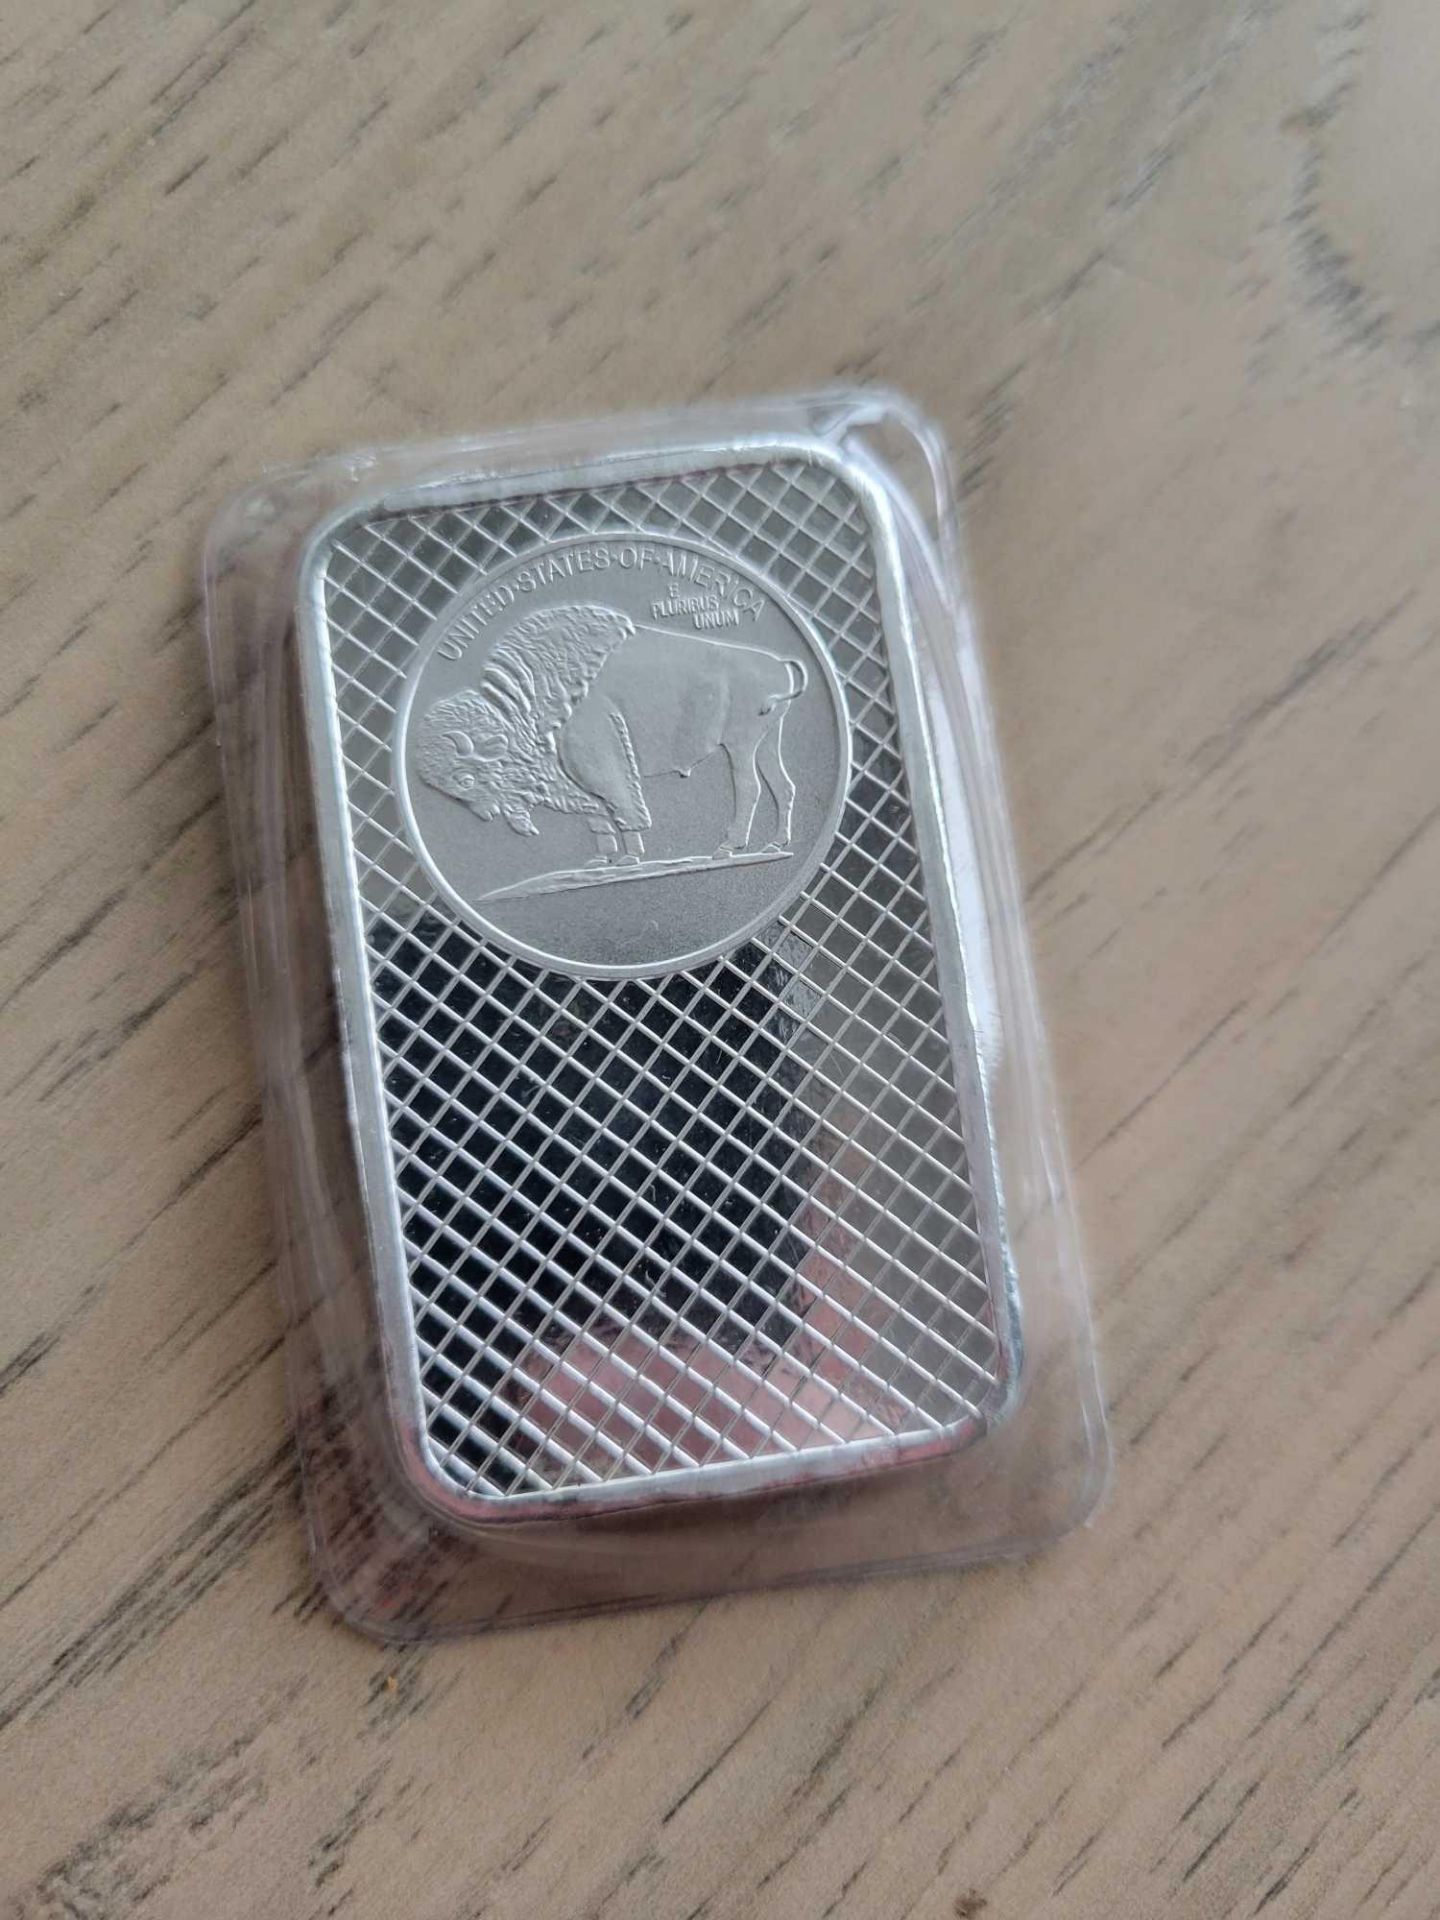 Indian Head 5 oz Silver Bar - Image 3 of 4